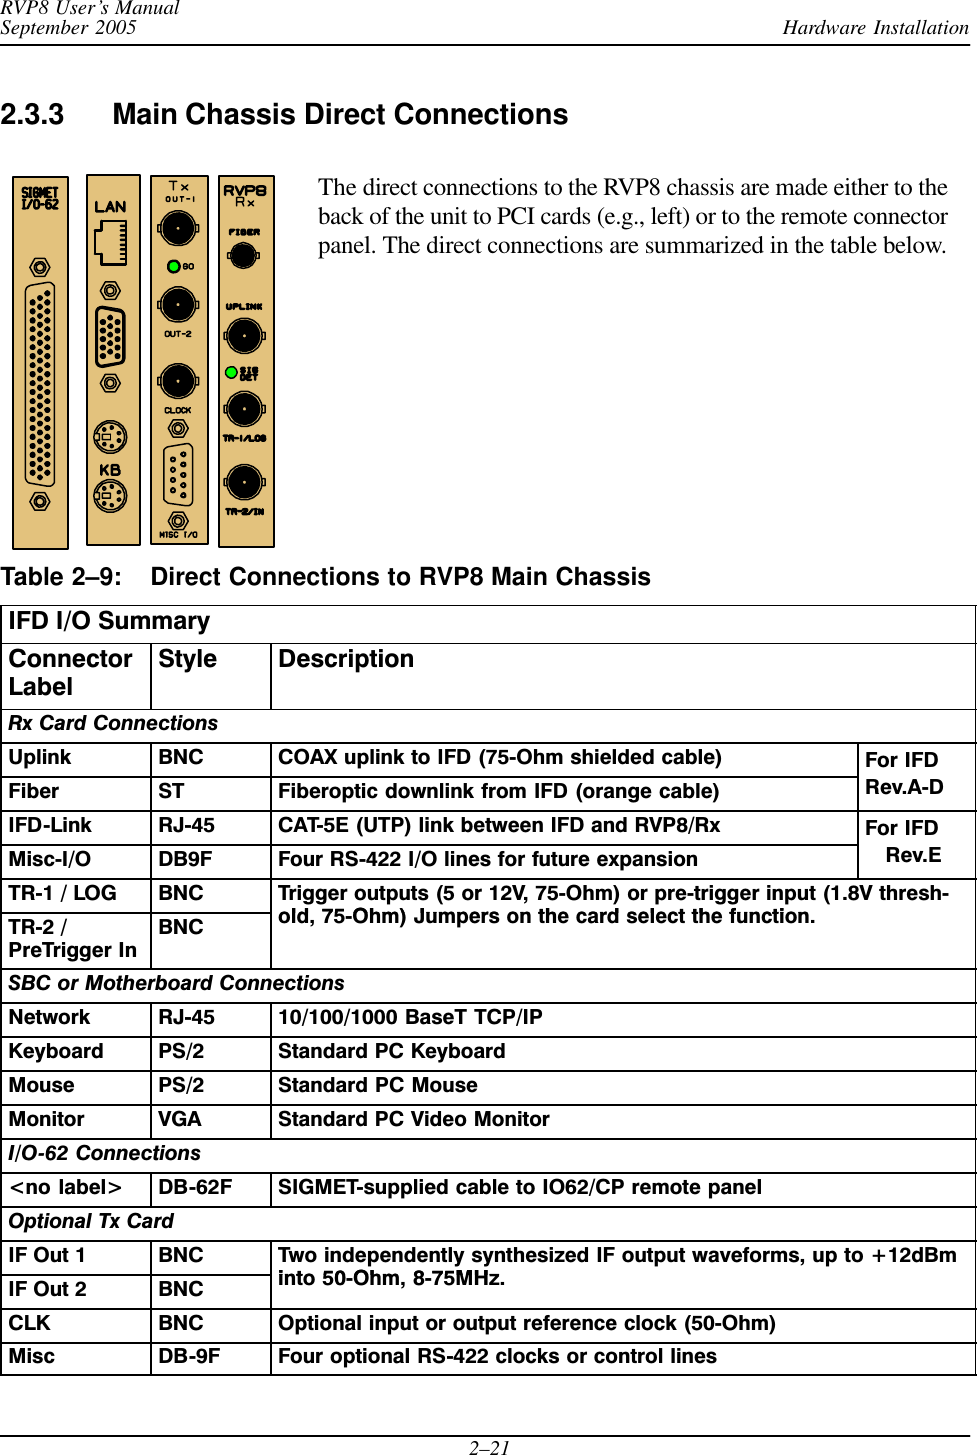 Hardware InstallationRVP8 User’s ManualSeptember 20052–212.3.3 Main Chassis Direct Connections The direct connections to the RVP8 chassis are made either to theback of the unit to PCI cards (e.g., left) or to the remote connectorpanel. The direct connections are summarized in the table below.Table 2–9: Direct Connections to RVP8 Main ChassisIFD I/O SummaryConnectorLabelStyle DescriptionRx Card ConnectionsUplink BNC COAX uplink to IFD (75ĆOhm shielded cable) For IFDFiber ST Fiberoptic downlink from IFD (orange cable) Rev.AĆDIFDĆLink RJĆ45 CATĆ5E (UTP) link between IFD and RVP8/Rx For IFDMiscĆI/O DB9F Four RSĆ422 I/O lines for future expansion Rev.ETRĆ1 / LOG BNC Trigger outputs (5 or 12V, 75ĆOhm) or preĆtrigger input (1.8V threshĆold 75 Ohm) Jumpers on the card select the functionTRĆ2 /PreTrigger InBNC old, 75ĆOhm) Jumpers on the card select the function.SBC or Motherboard ConnectionsNetwork RJĆ45 10/100/1000 BaseT TCP/IPKeyboard PS/2 Standard PC KeyboardMouse PS/2 Standard PC MouseMonitor VGA Standard PC Video MonitorI/OĆ62 Connections&lt;no label&gt; DBĆ62F SIGMETĆsupplied cable to IO62/CP remote panelOptional Tx CardIF Out 1 BNC Two independently synthesized IF output waveforms, up to +12dBminto 50 Ohm 8 75MHzIF Out 2 BNC into 50ĆOhm, 8Ć75MHz.CLK BNC Optional input or output reference clock (50ĆOhm)Misc DBĆ9F Four optional RSĆ422 clocks or control lines